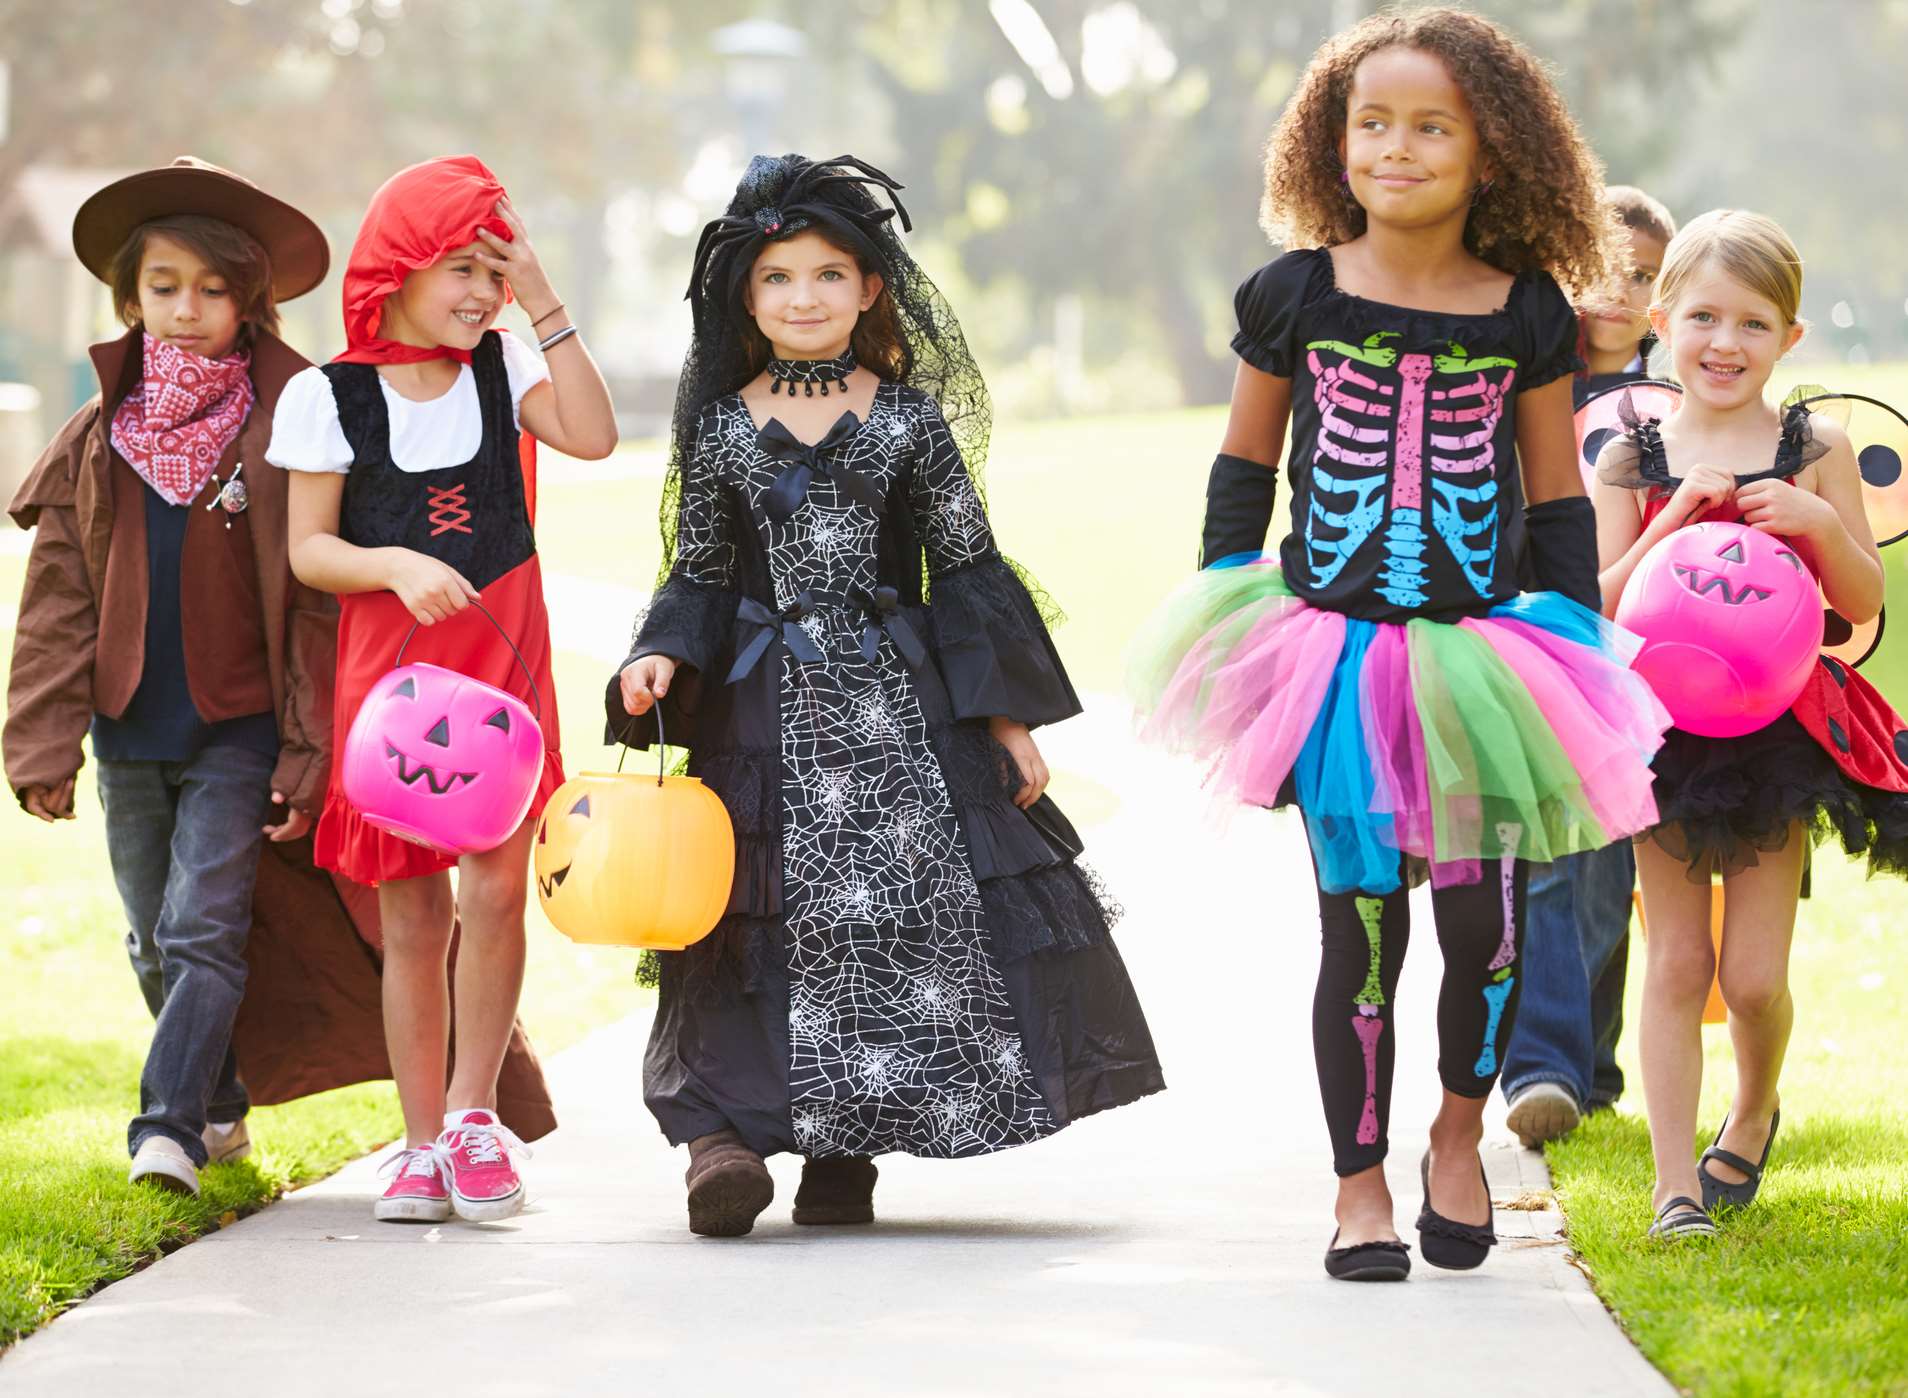 Set off on a Halloween trail this weekend